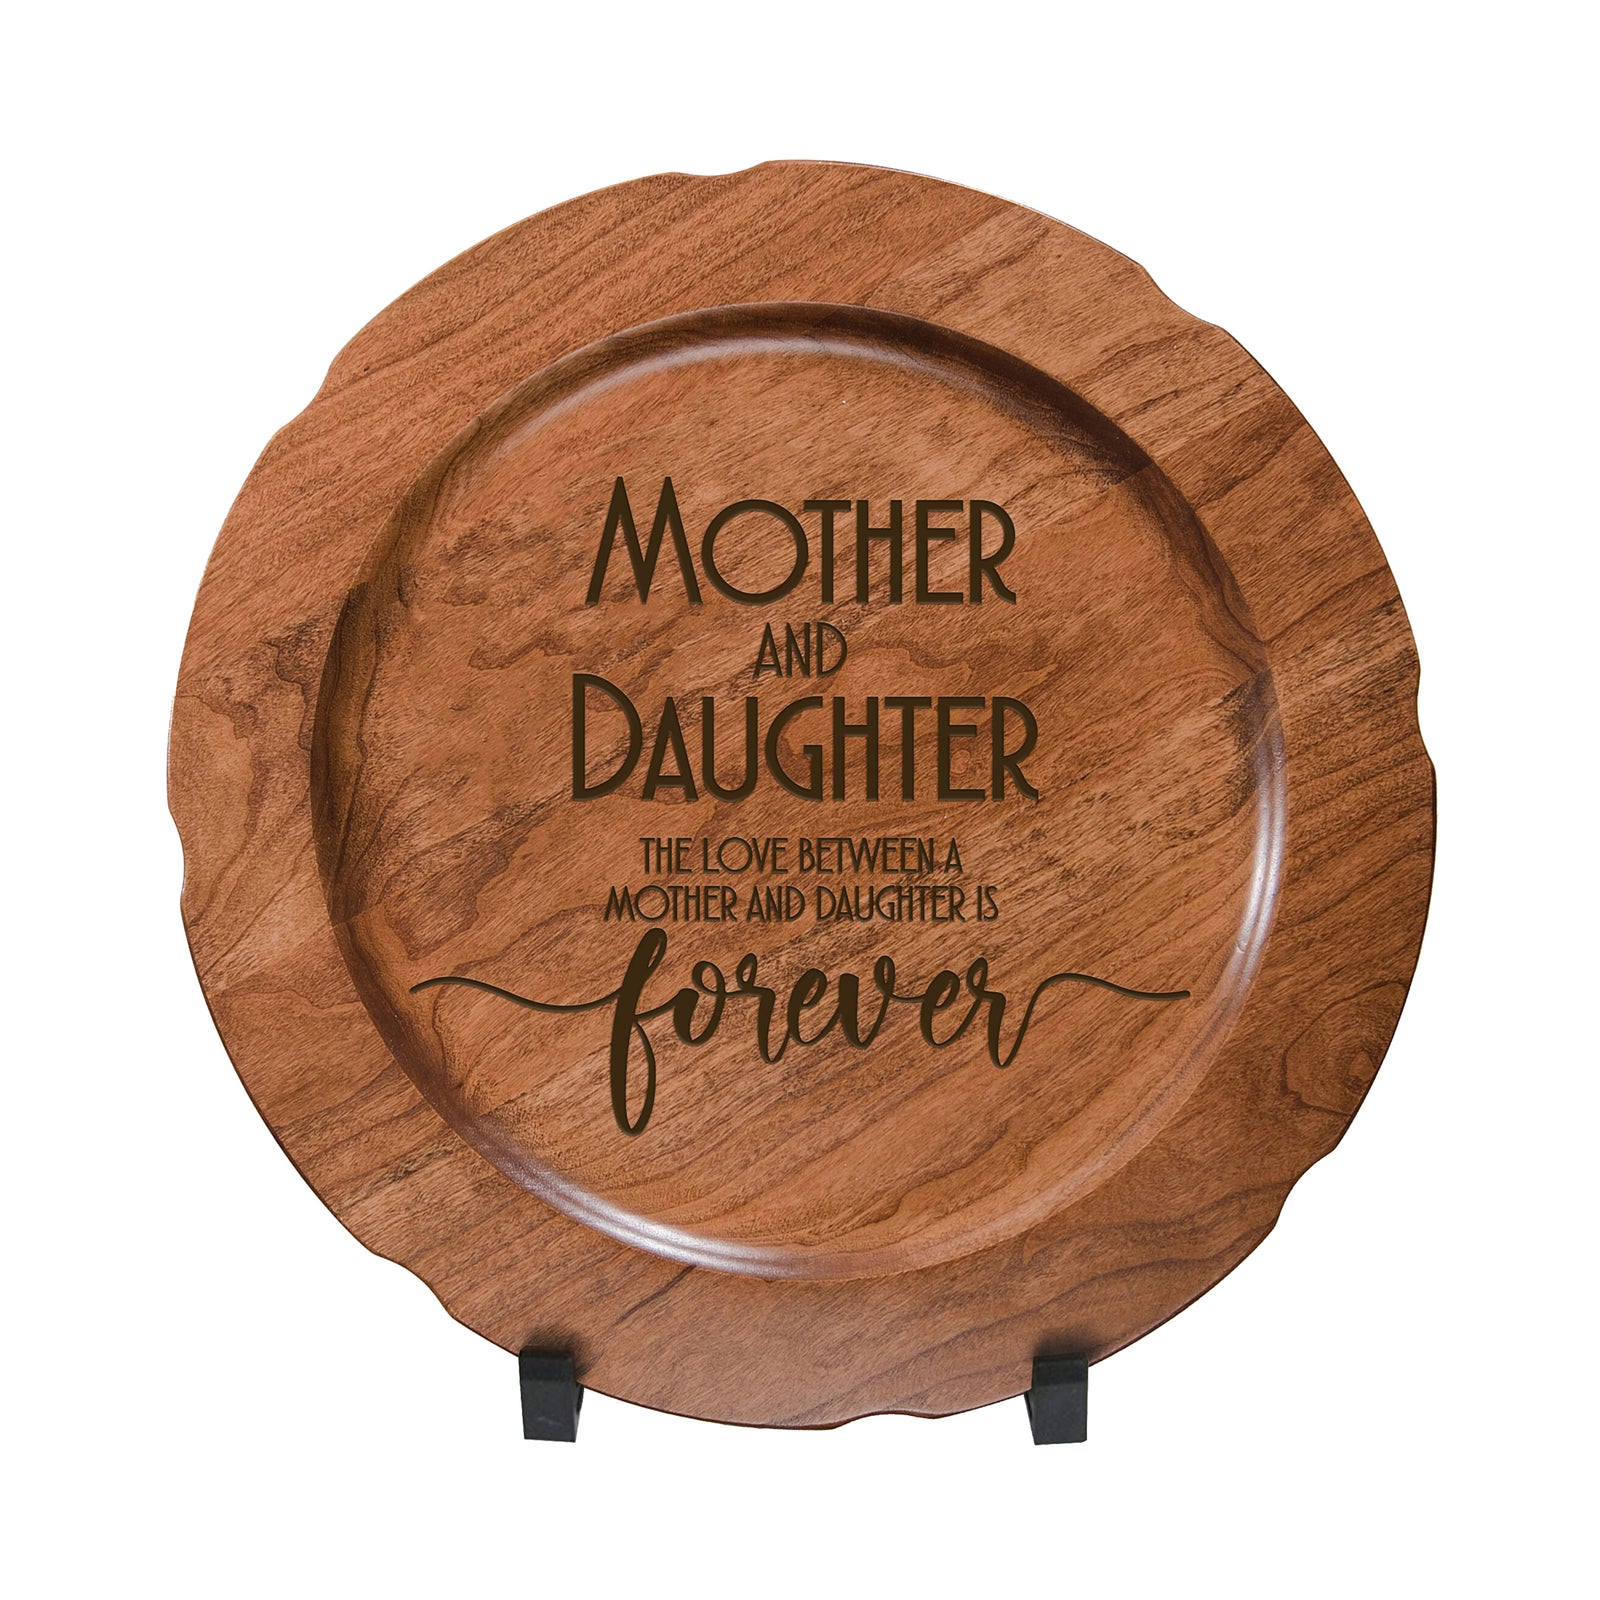 LifeSong Milestones Wooden Decorative Plate Family Keepsake 12in Mother Forever Housewarming Mother’s Day Gift Home Wall Decor Kitchen Keepsake